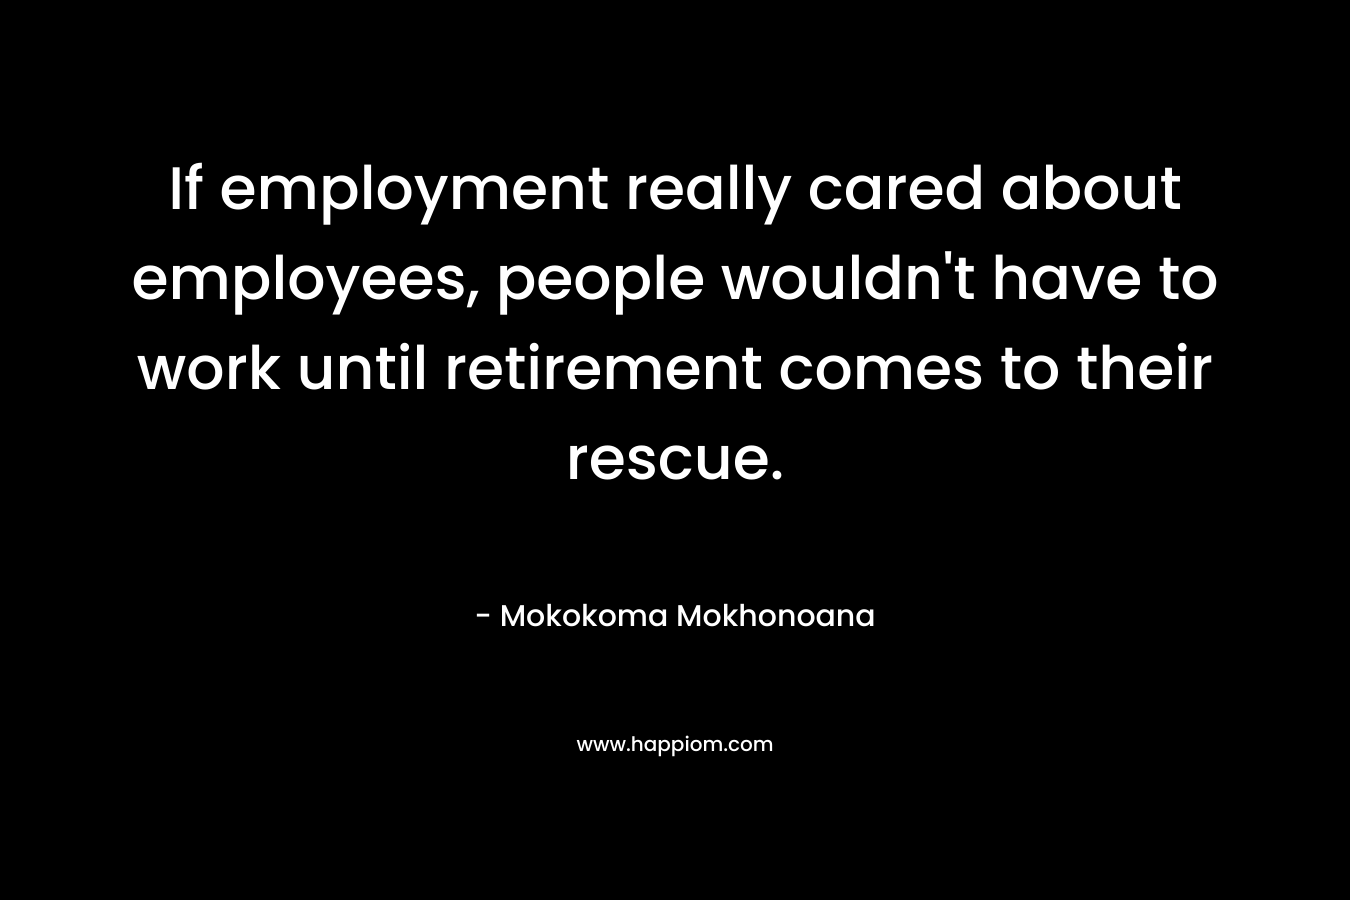 If employment really cared about employees, people wouldn’t have to work until retirement comes to their rescue. – Mokokoma Mokhonoana